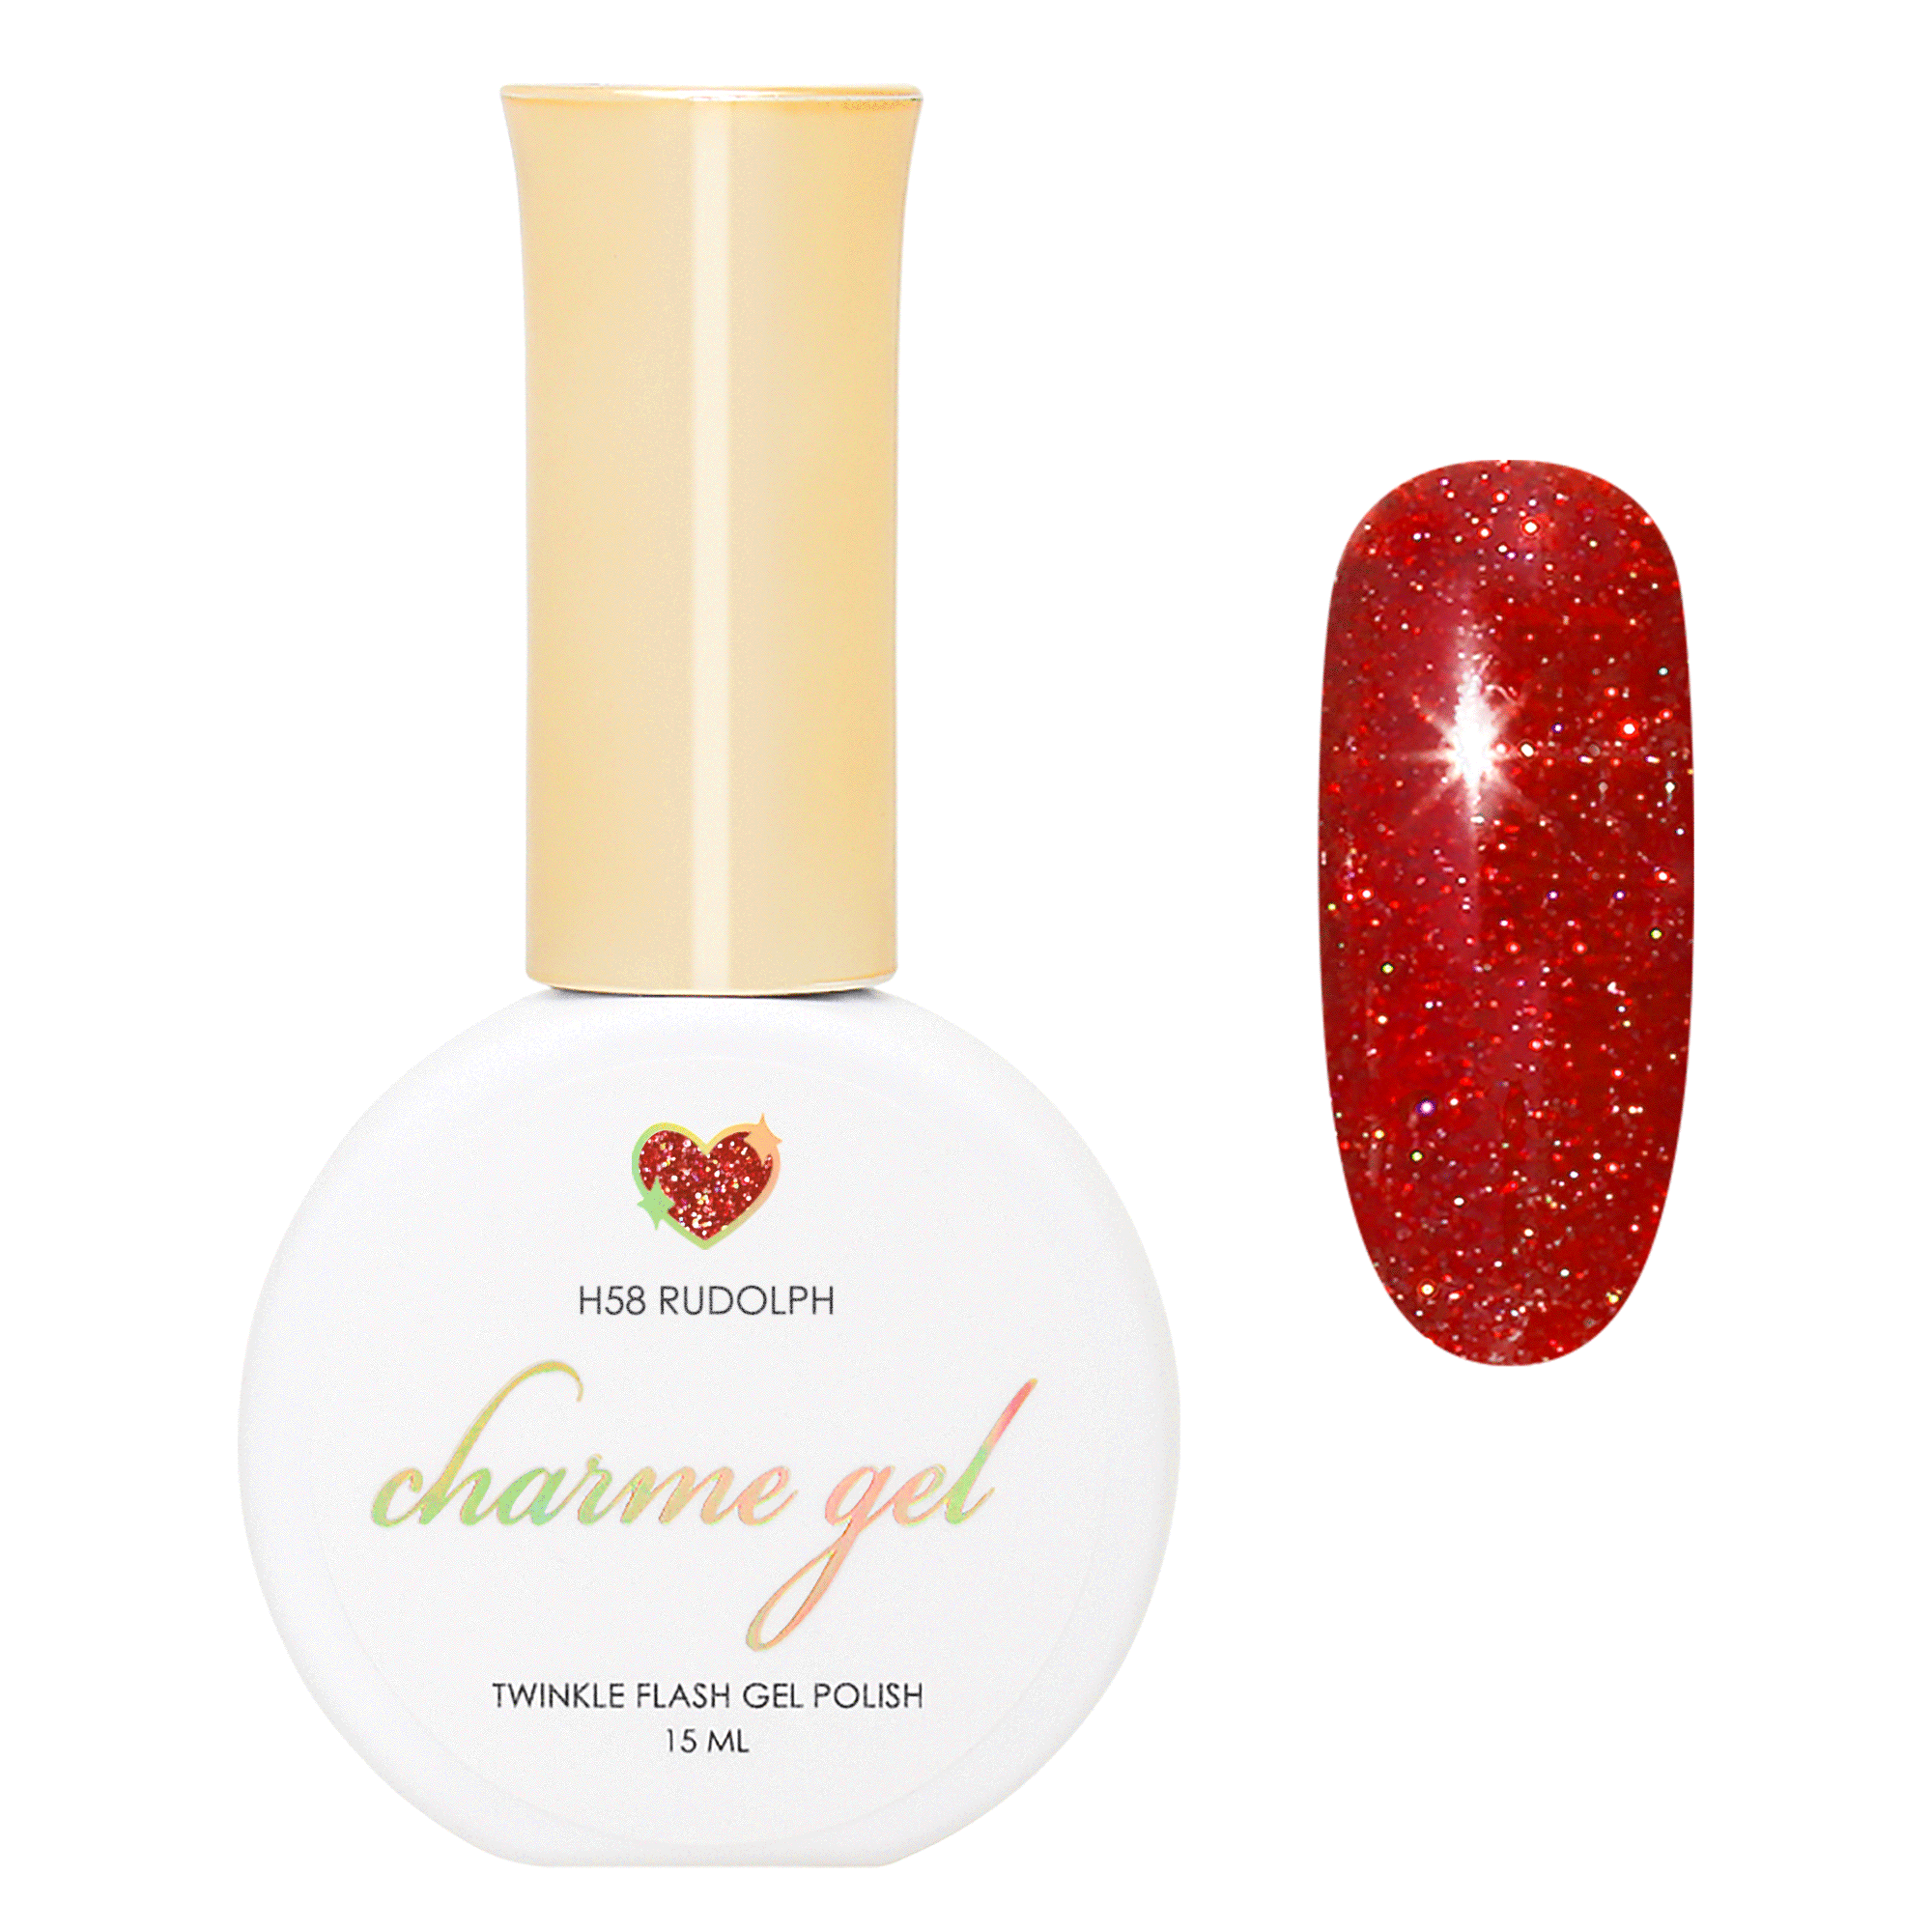 Charme Gel / Holoday Twinkle H58 Rudolph Red Flash Nail Polish